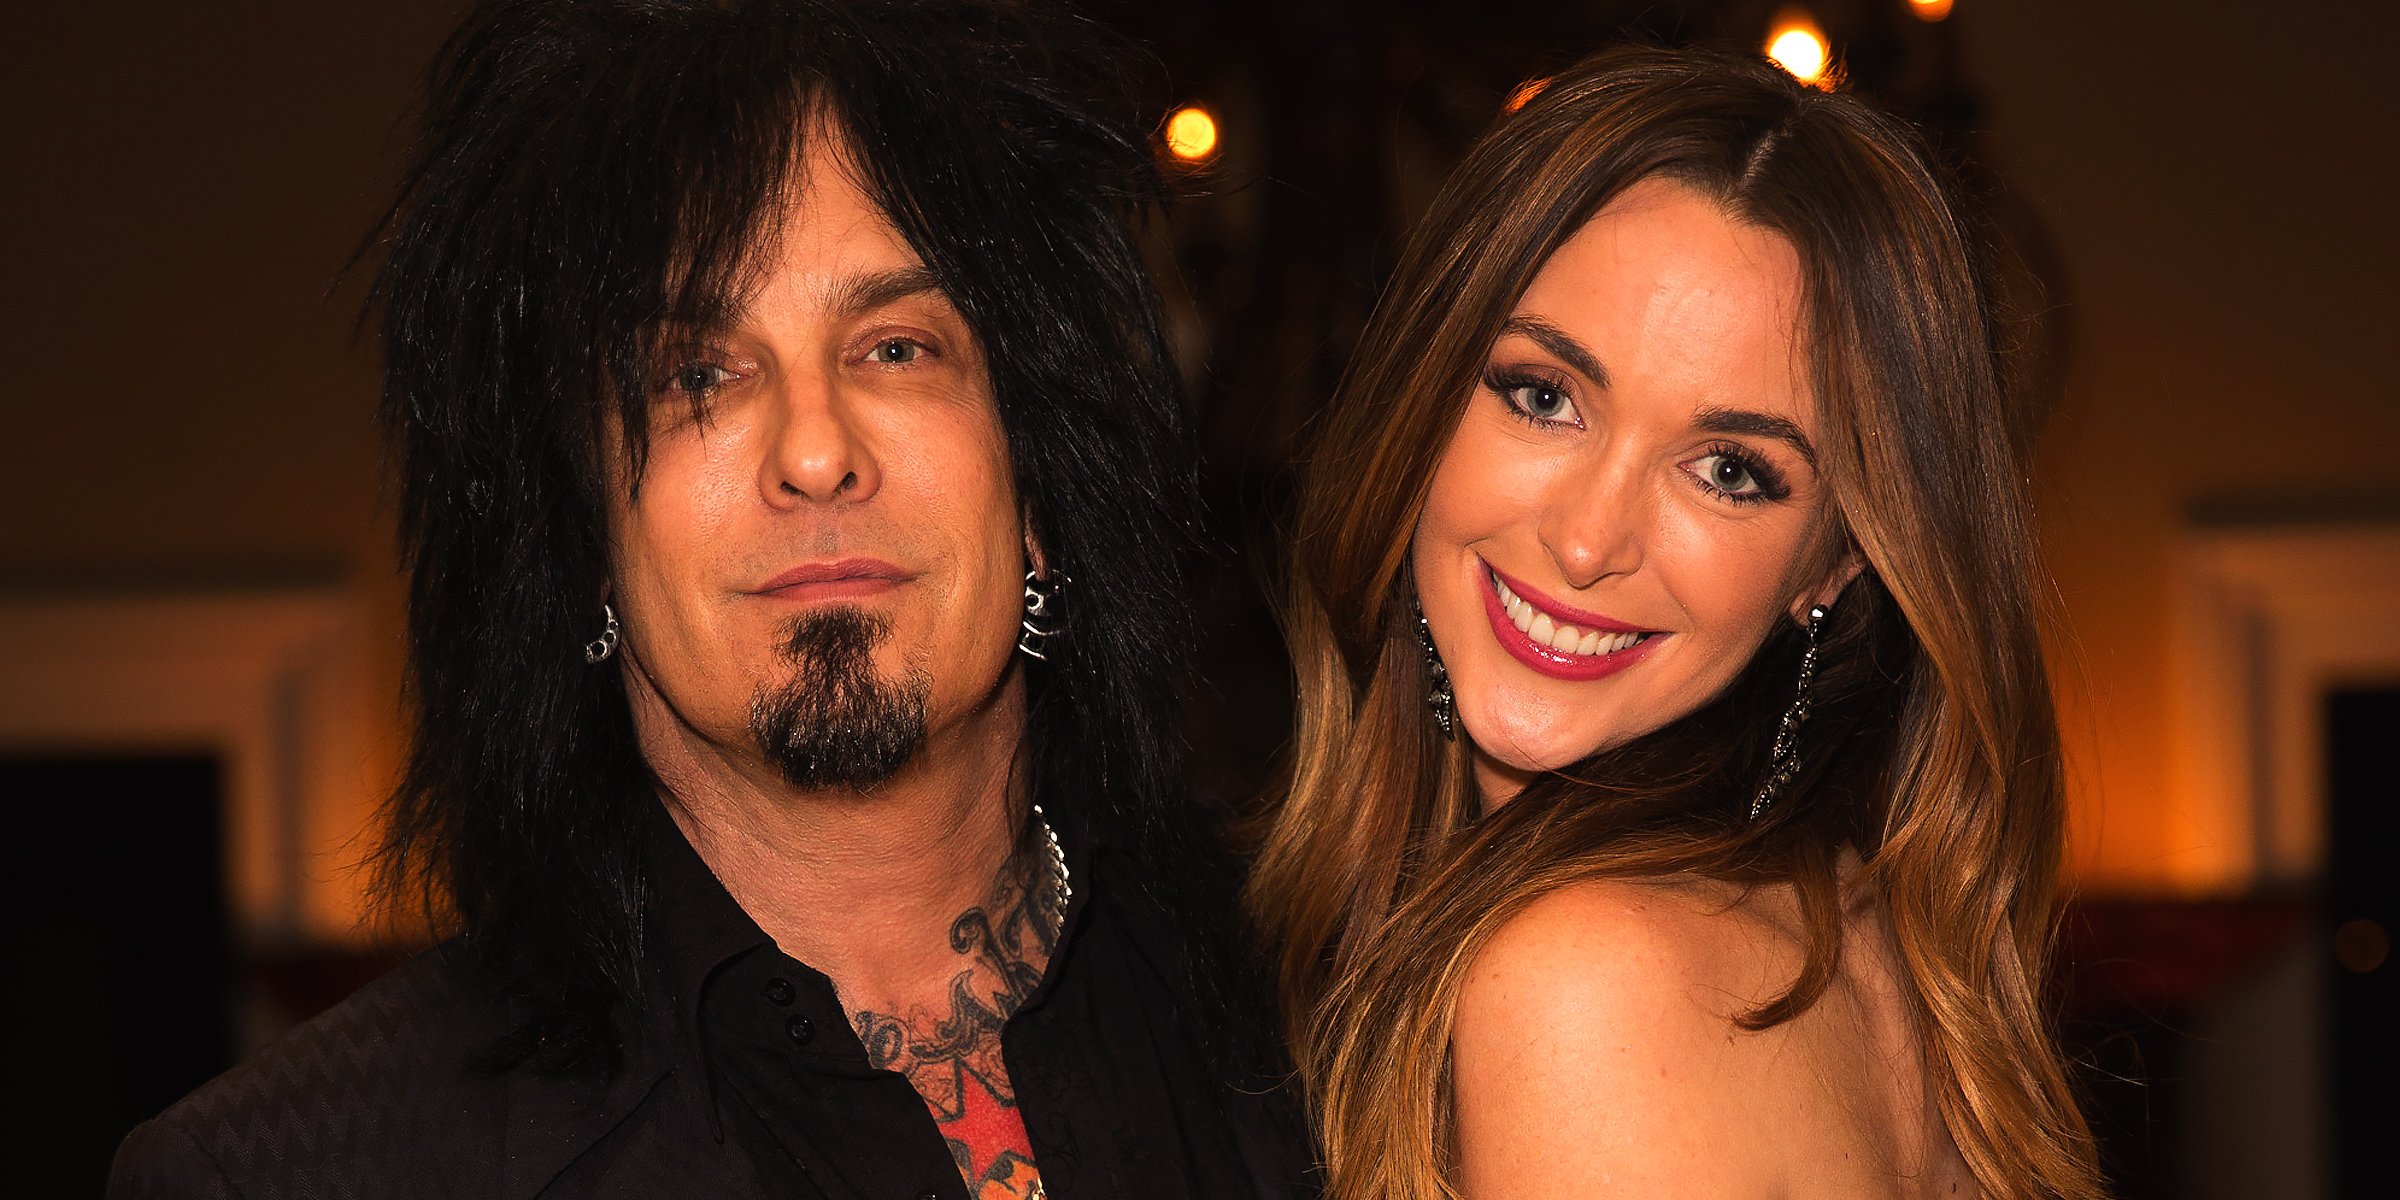 Nikki Sixx and Courtney Bringham | Source: Getty Images